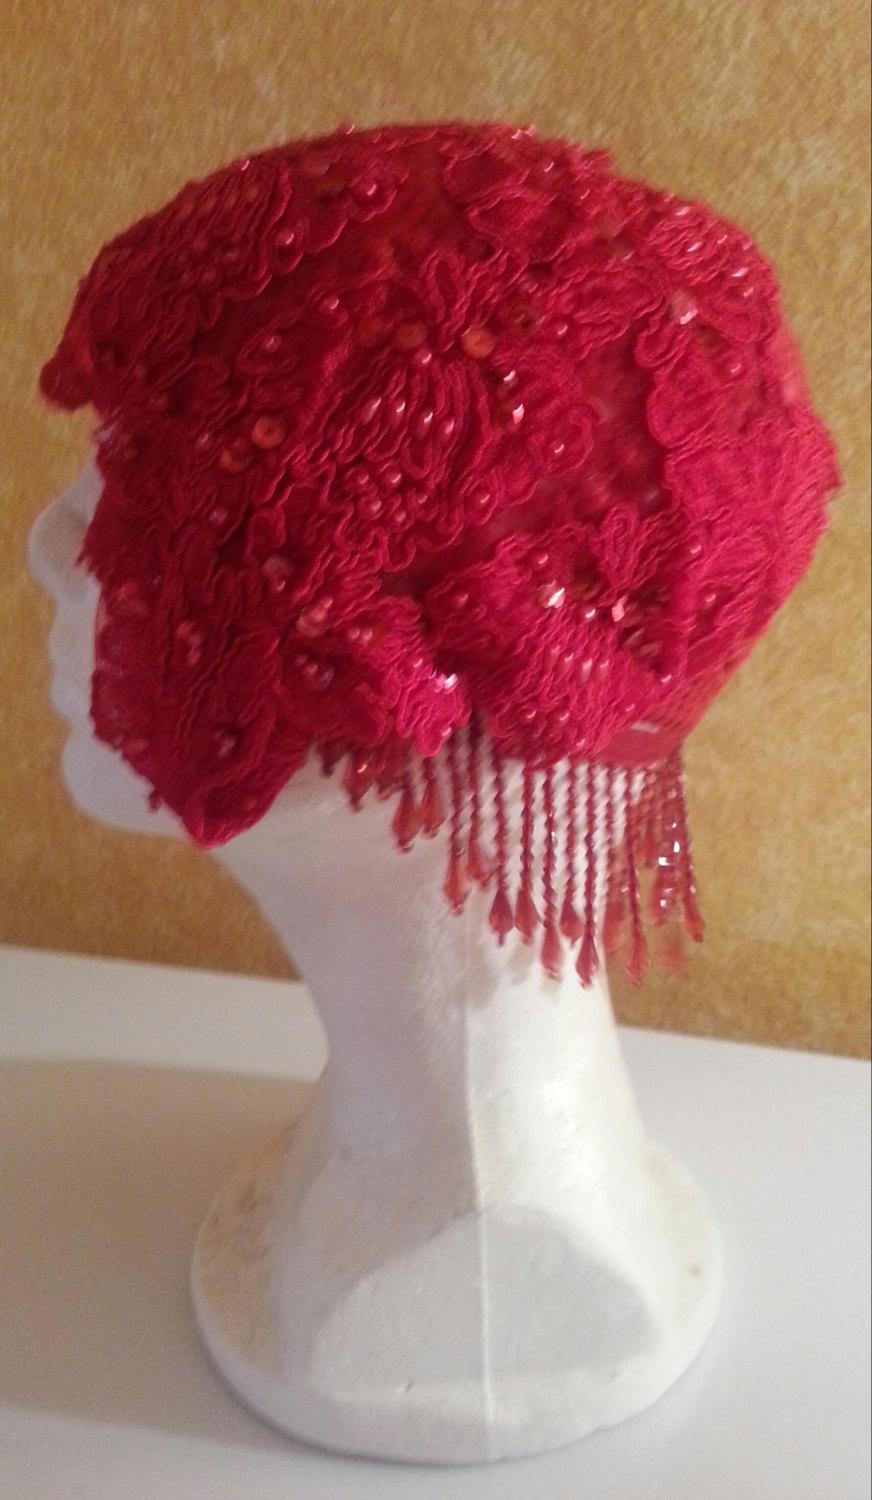 Wedding - Red Gatsby Roaring 20's Flapper Style Crochet Beaded Lace Waterfall Headpiece Hat Bridal Club Party Costume